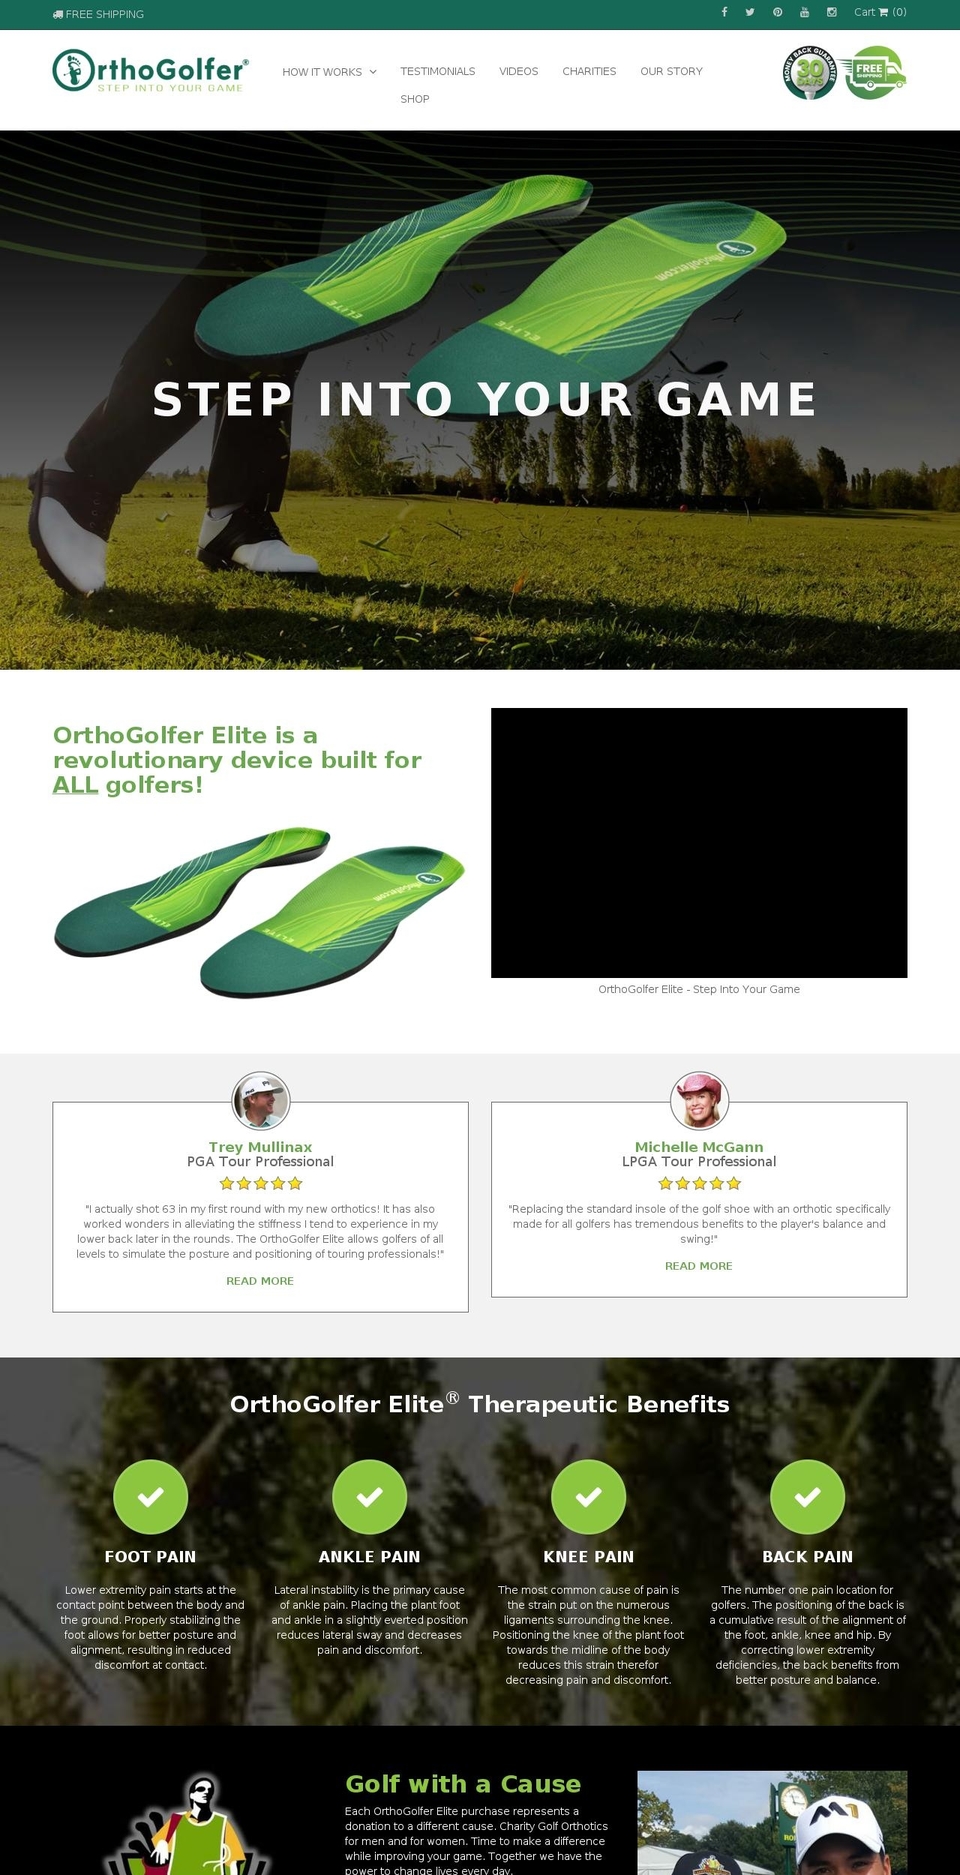 QUEEN Shopify theme site example orthogolfer.com